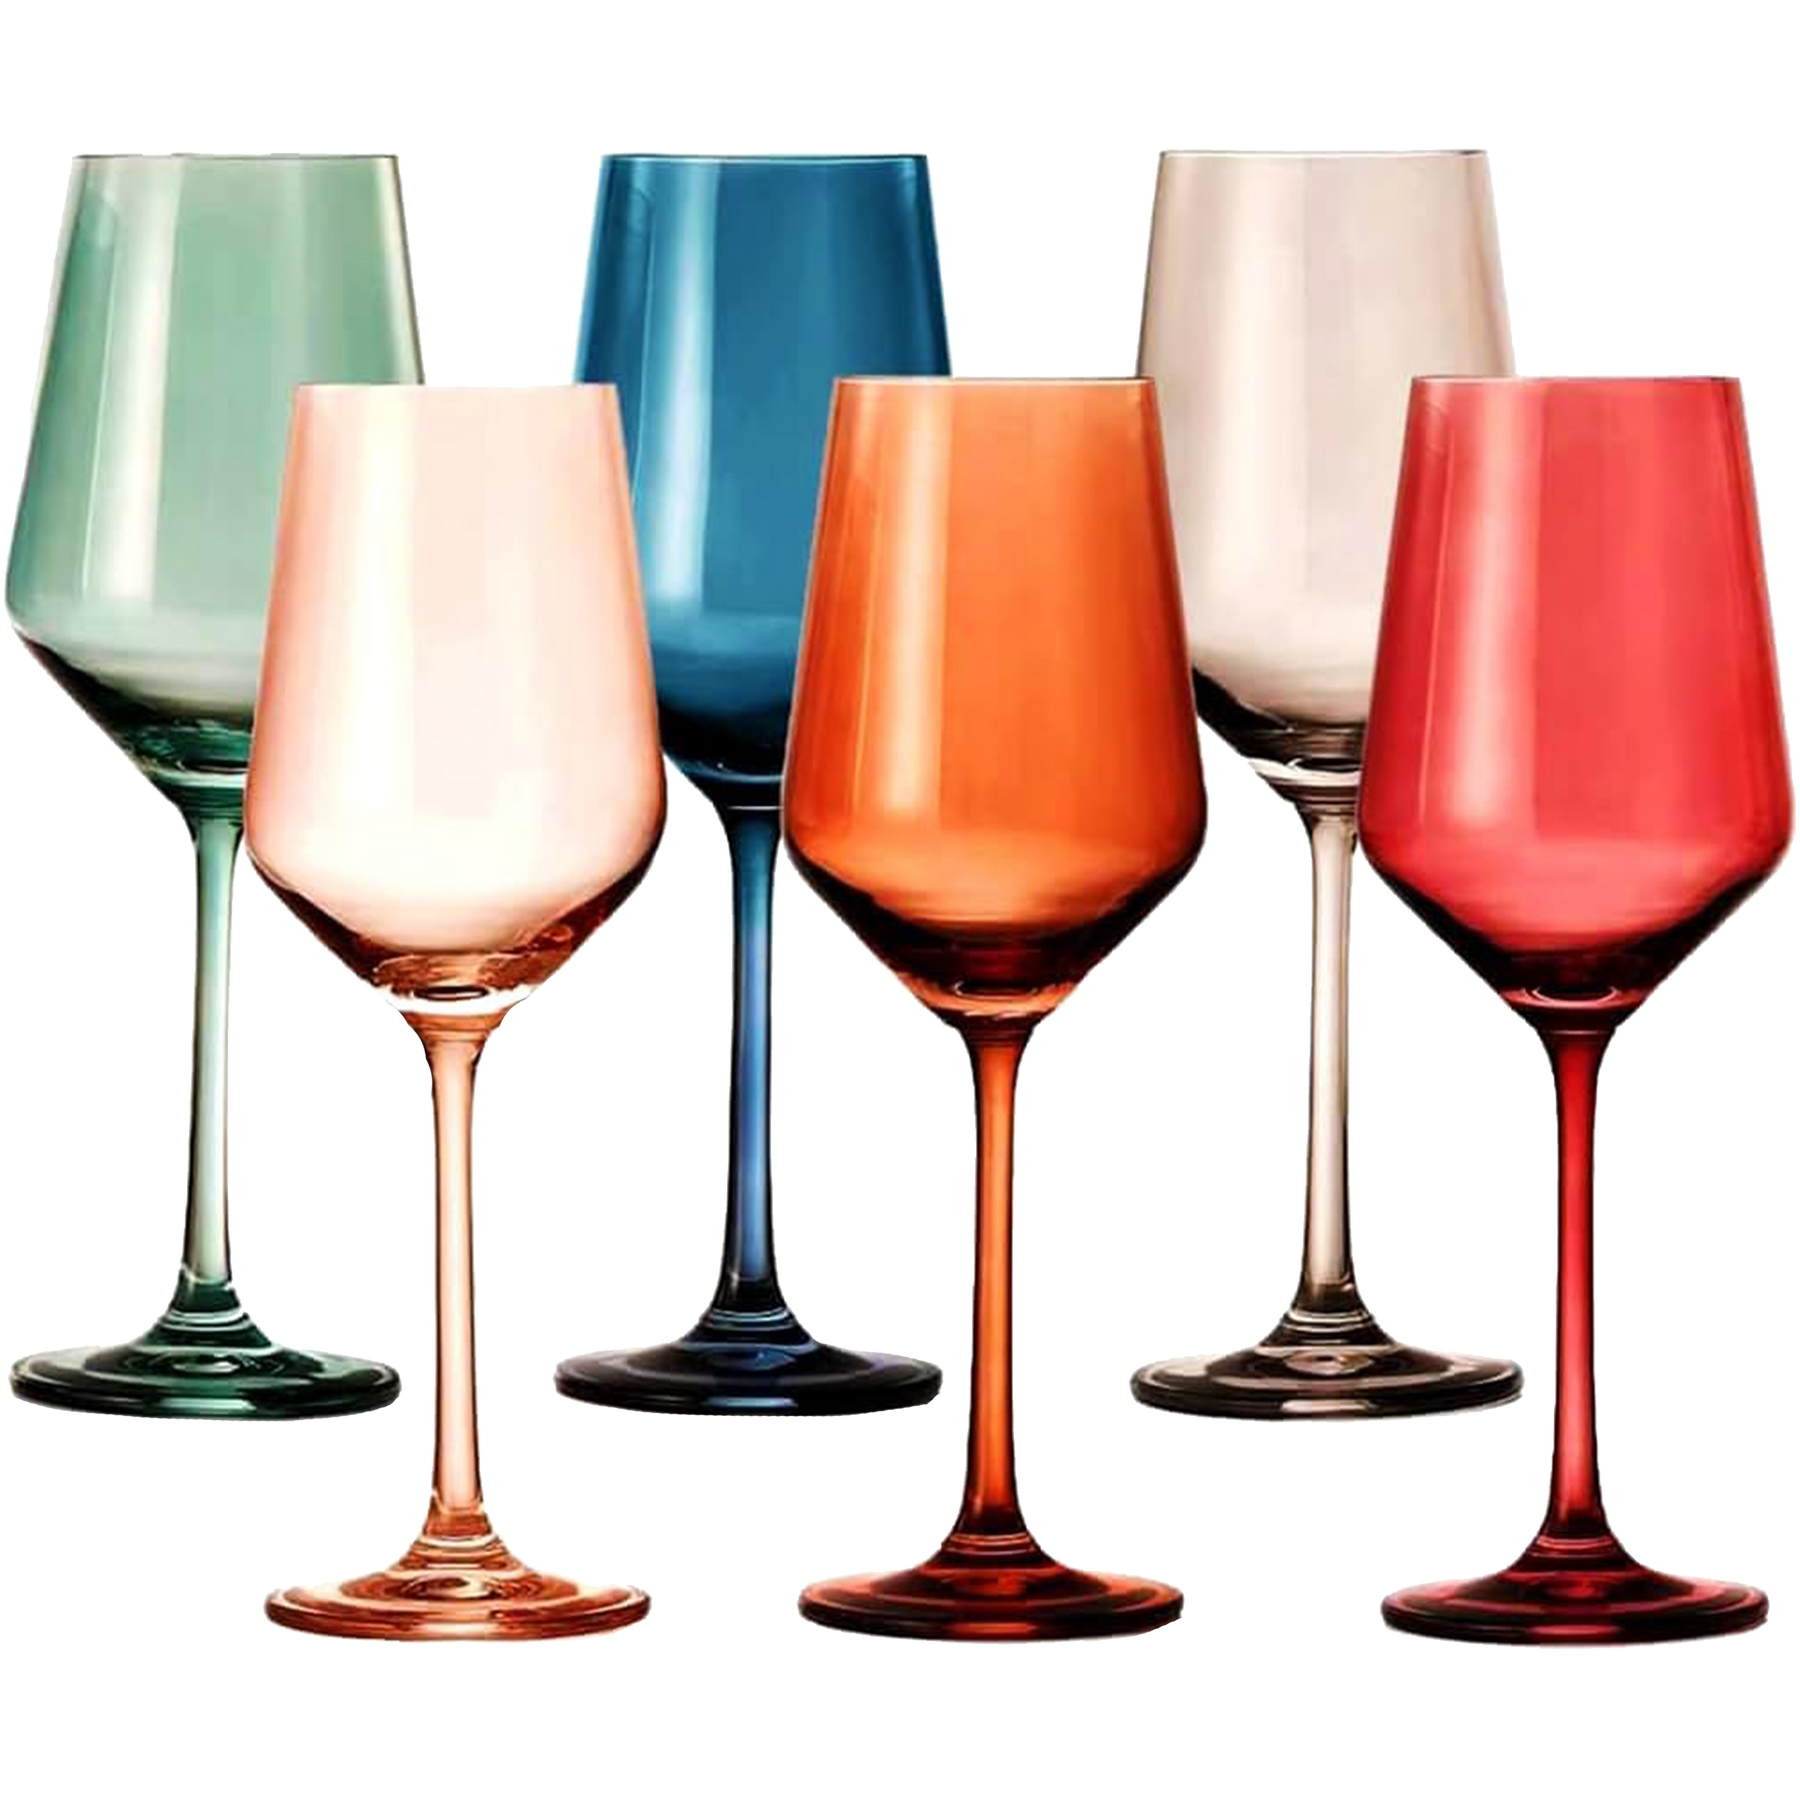 Colored Crystal Wine Glass Set of 6, Gift For Him, Her, Wife, Friend -  Large 12 oz Glasses, Unique Italian Style Tall Drinkware - Red & White,  Dinner